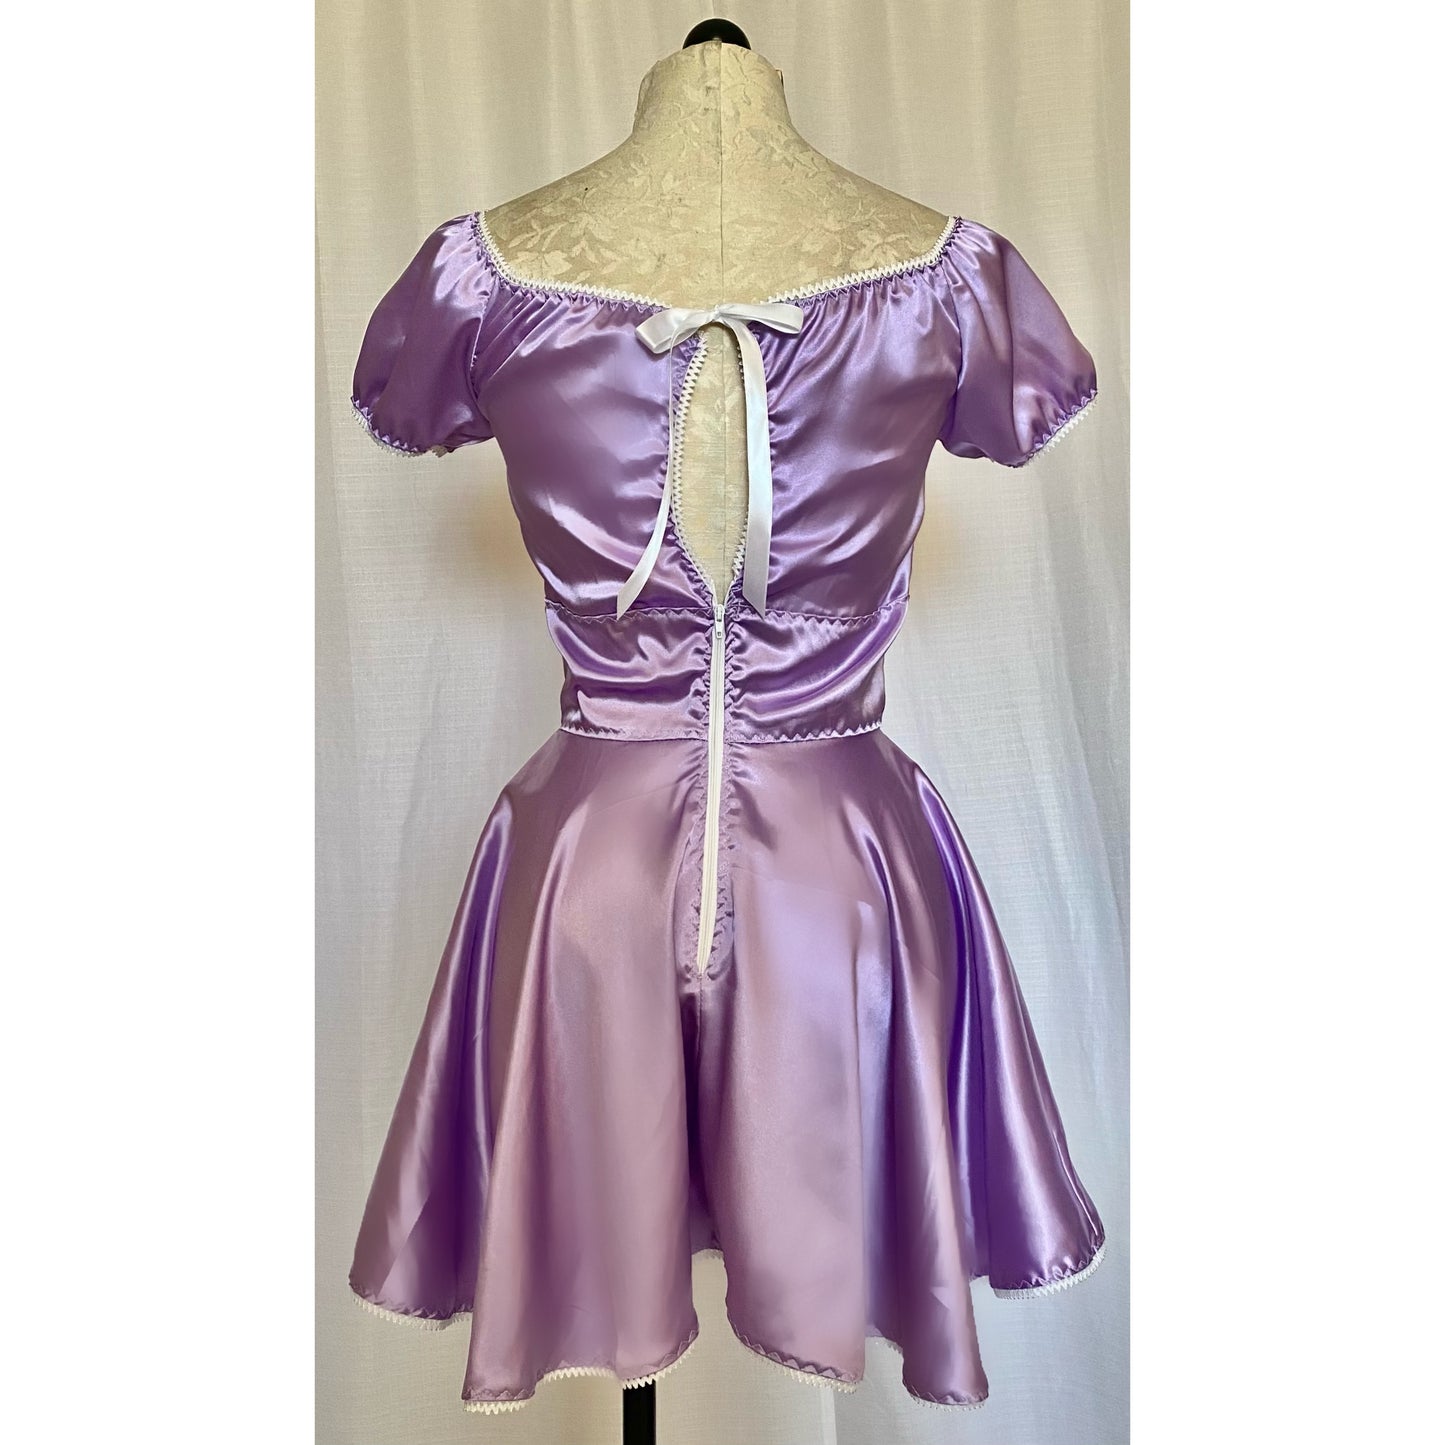 The Missy Dress in Violet